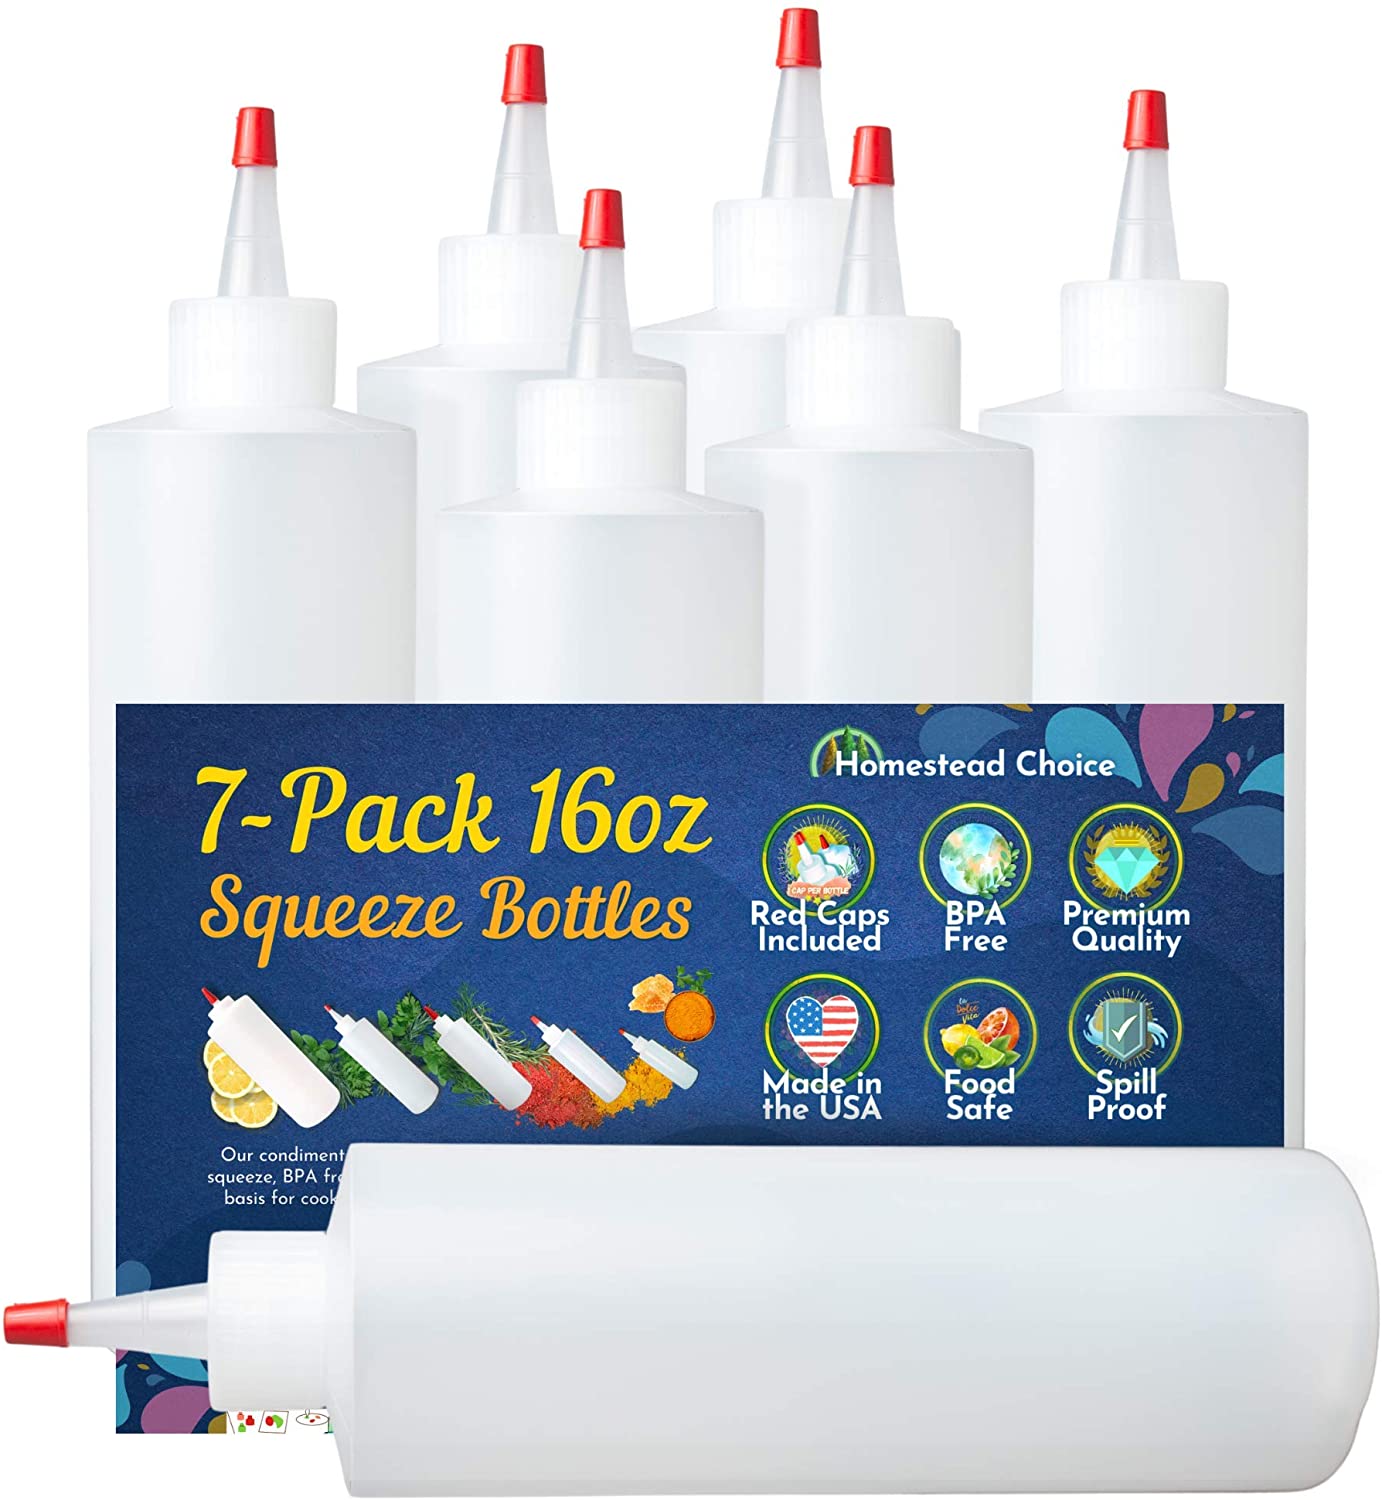 Homestead Choice Premium Squeeze Bottles For Sauces, 7-Pack